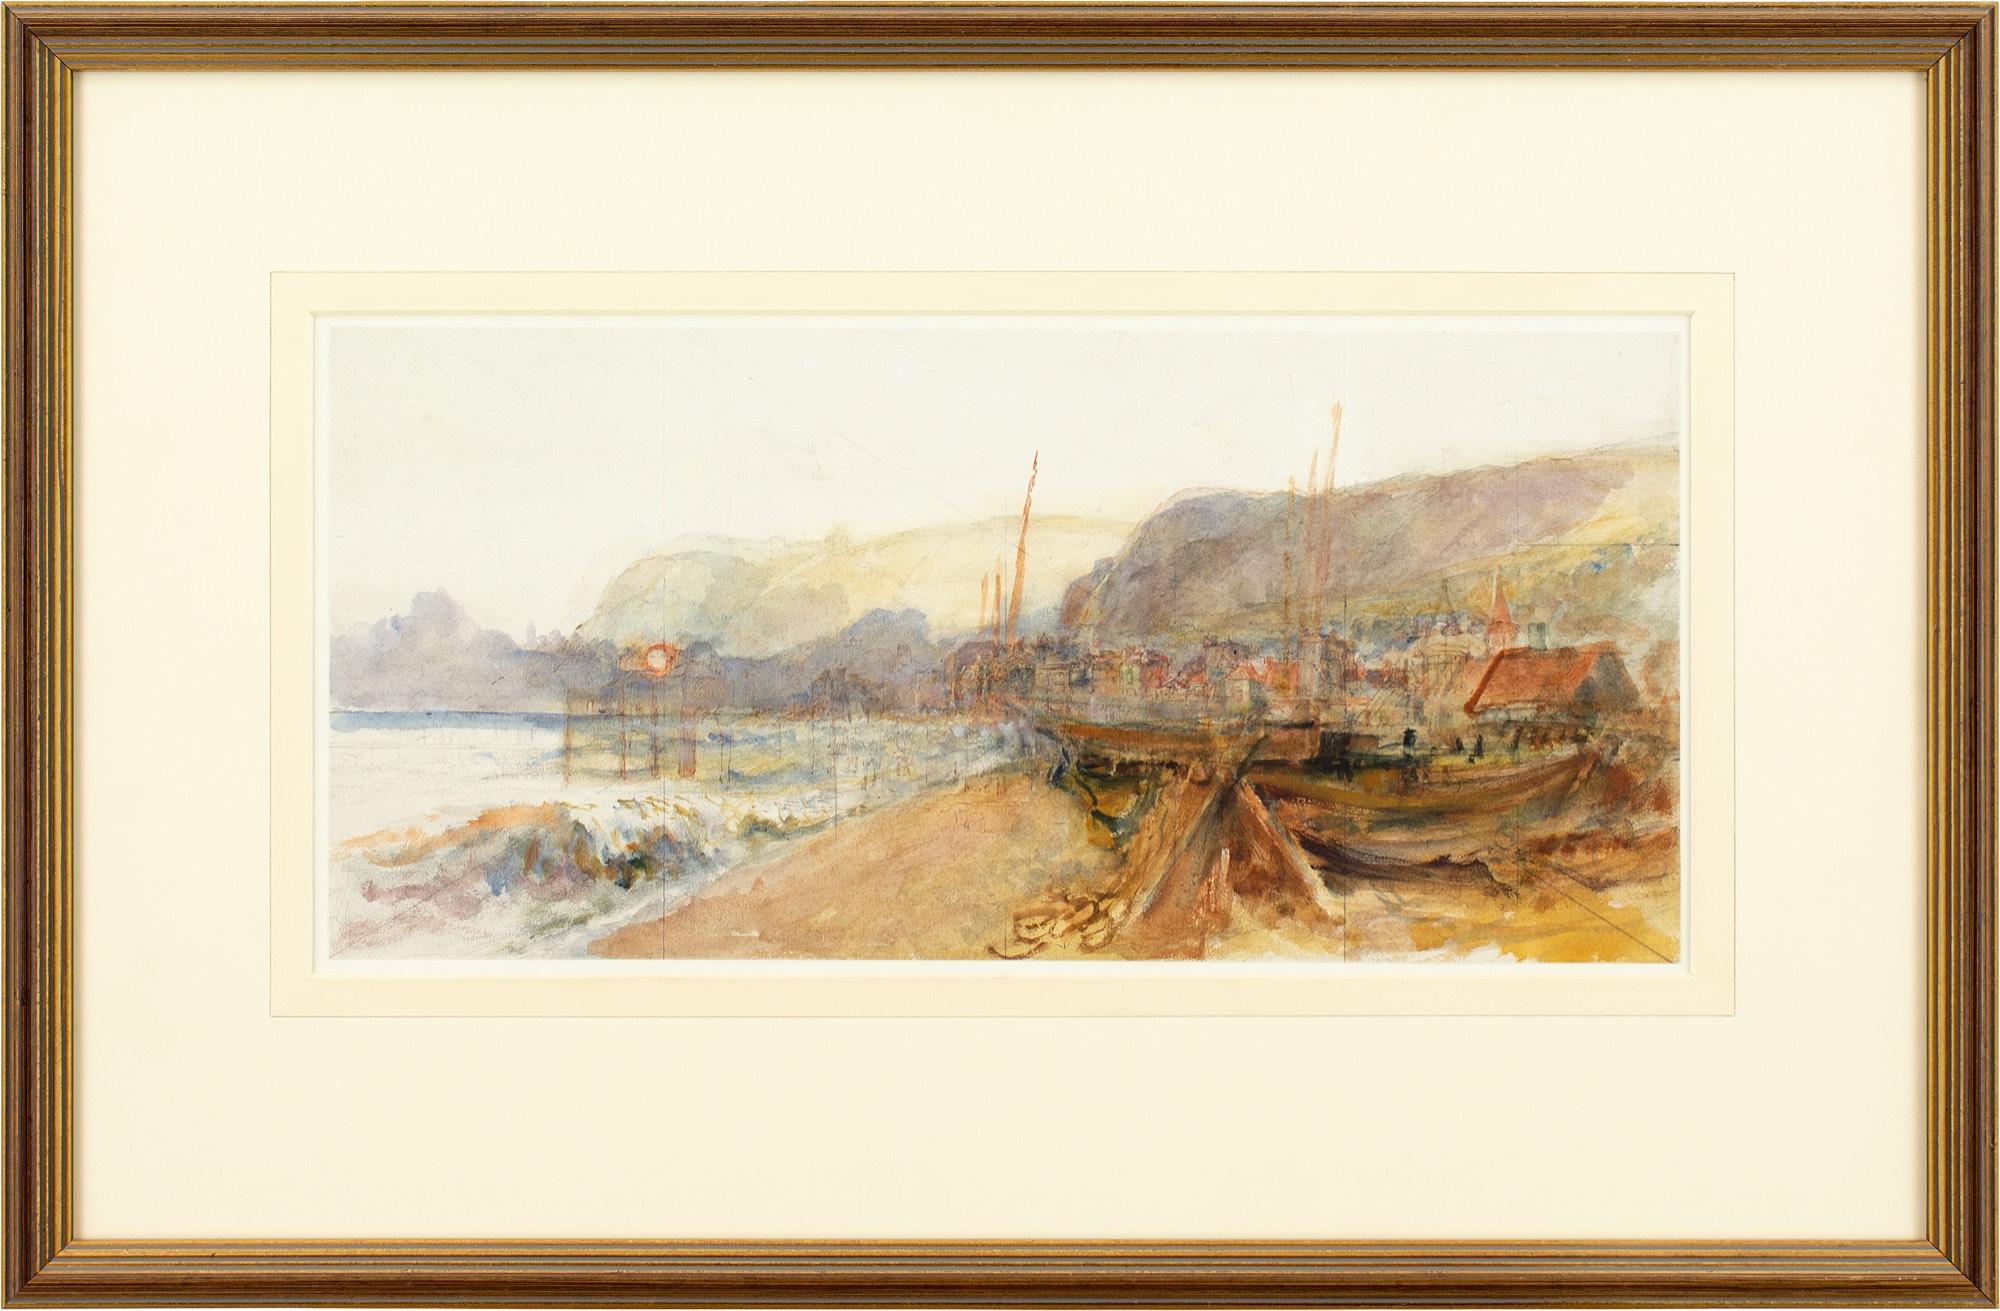 This early 20th-century watercolour by English artist Henry Robertson (1848-1930) depicts the beach at Hastings.

Nets sprawl from a dormant fishing boat before dapples of beachfront buildings. The misty tints of cliffs punctuated by masts.